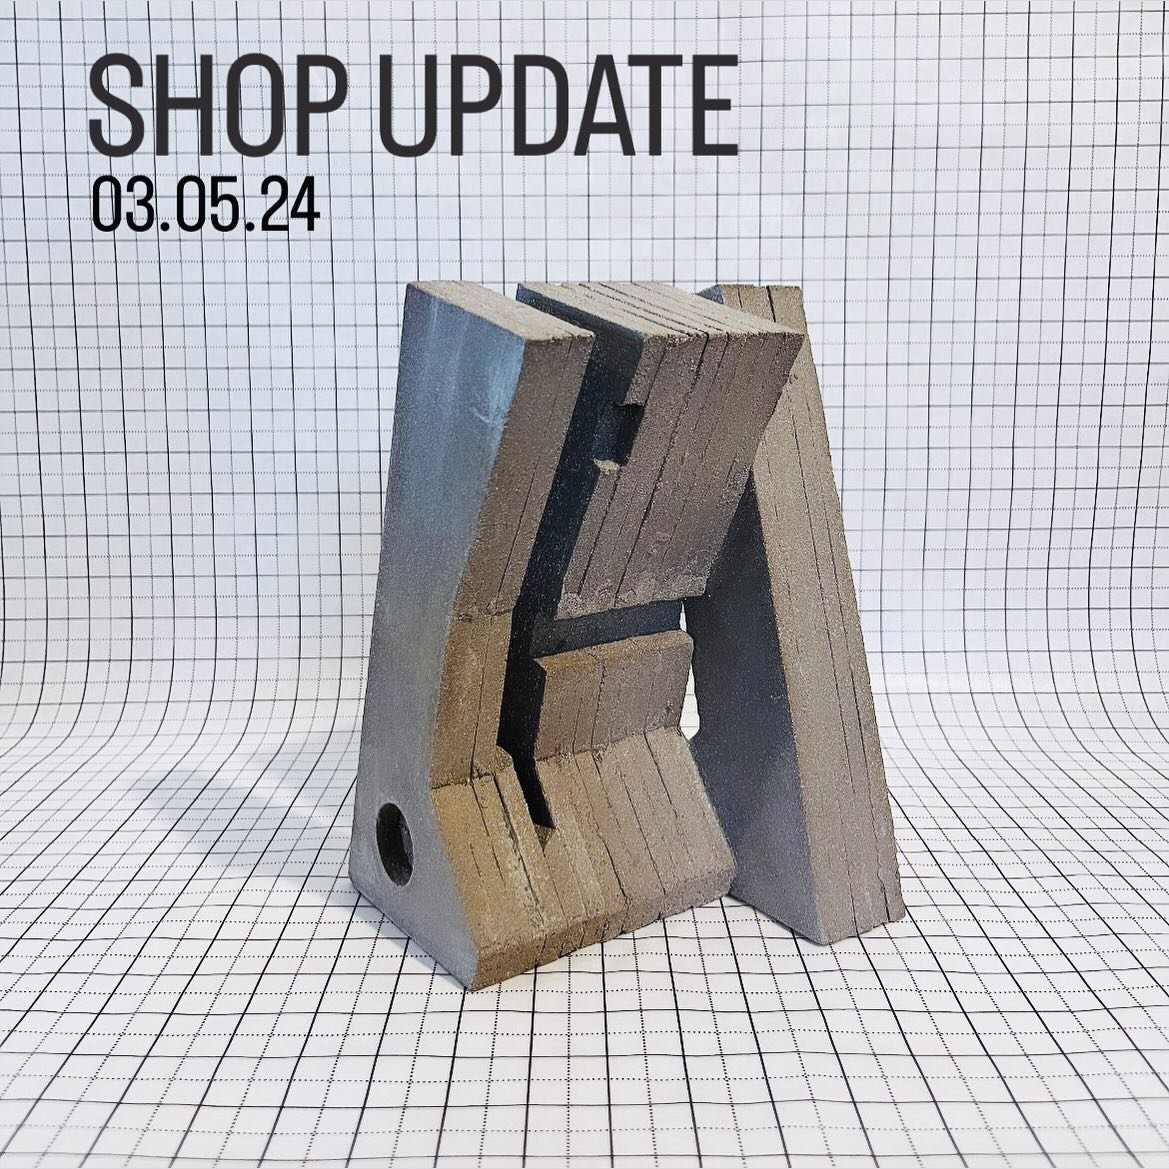 My next shop update is scheduled for Friday May 3rd. 
I'll be sharing some new work as well as some BH offers! Save the date do you don't miss out. 

#ceramic #handmade #clay #sculpture #brutalist #brutallondon #architecture #design #potterylove #cer